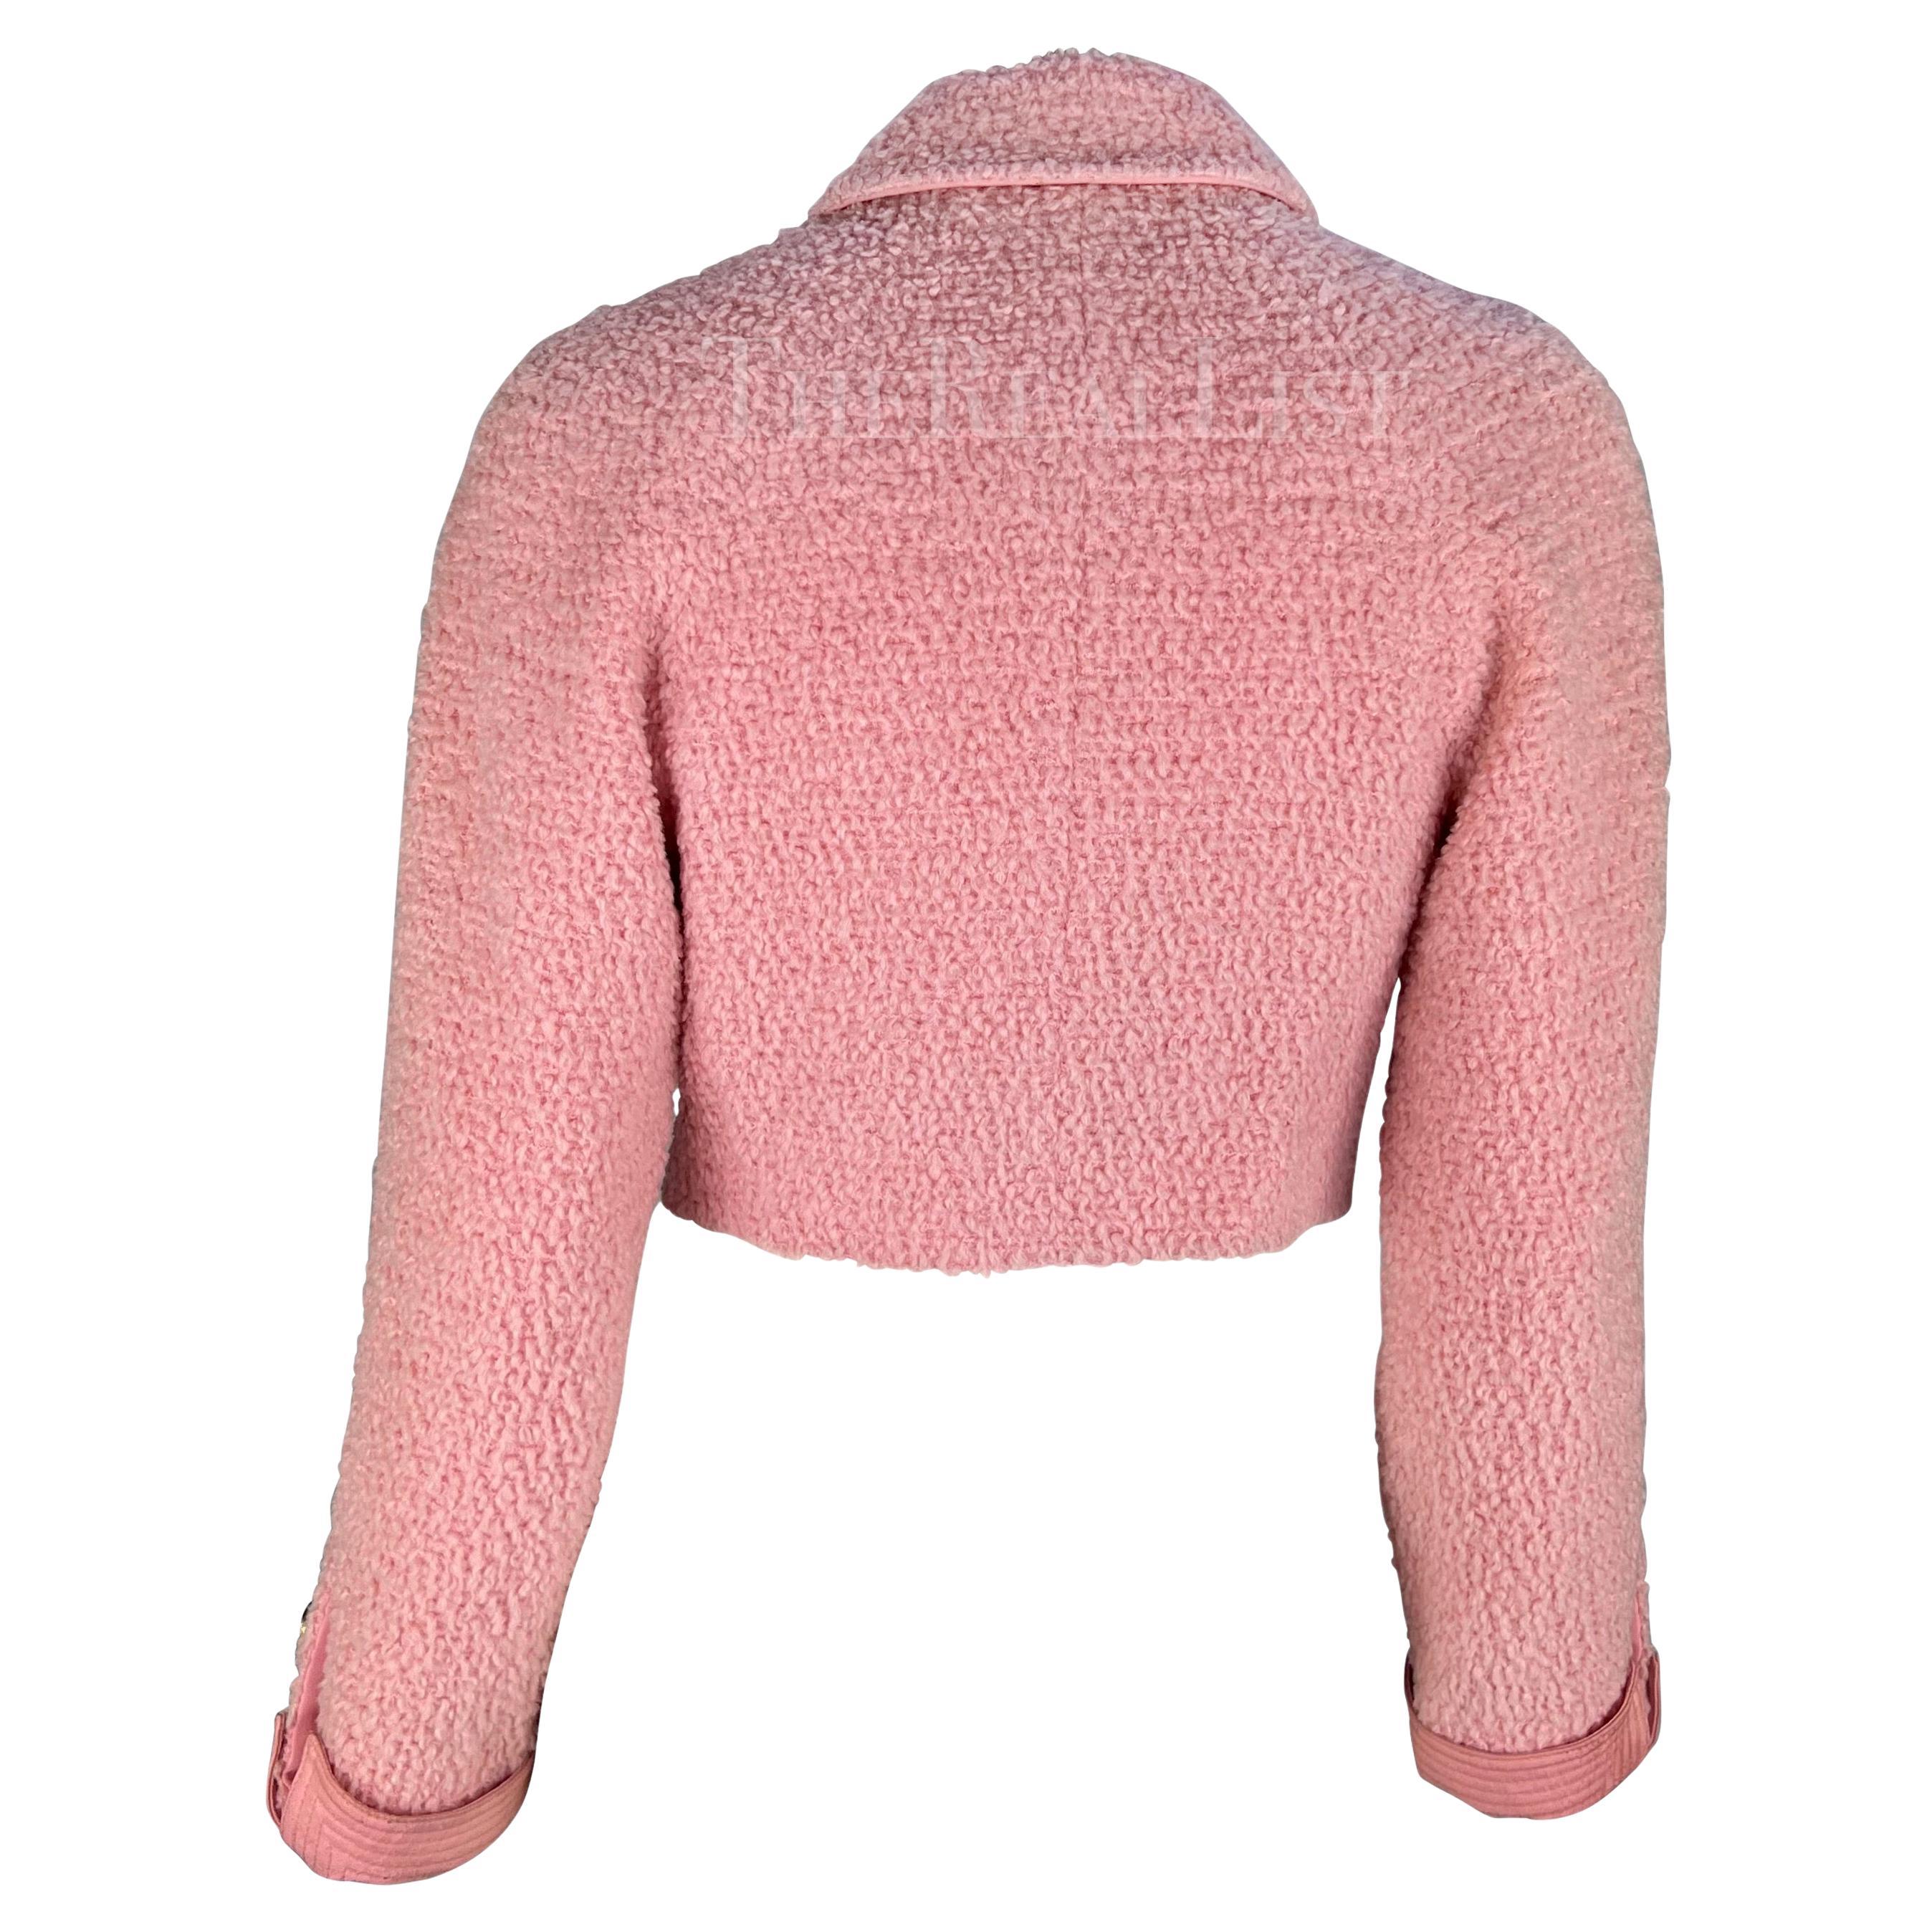 F/W 1994 Gianni Versace Light Pink Tweed Cropped Double Breasted Runway Jacket For Sale 2